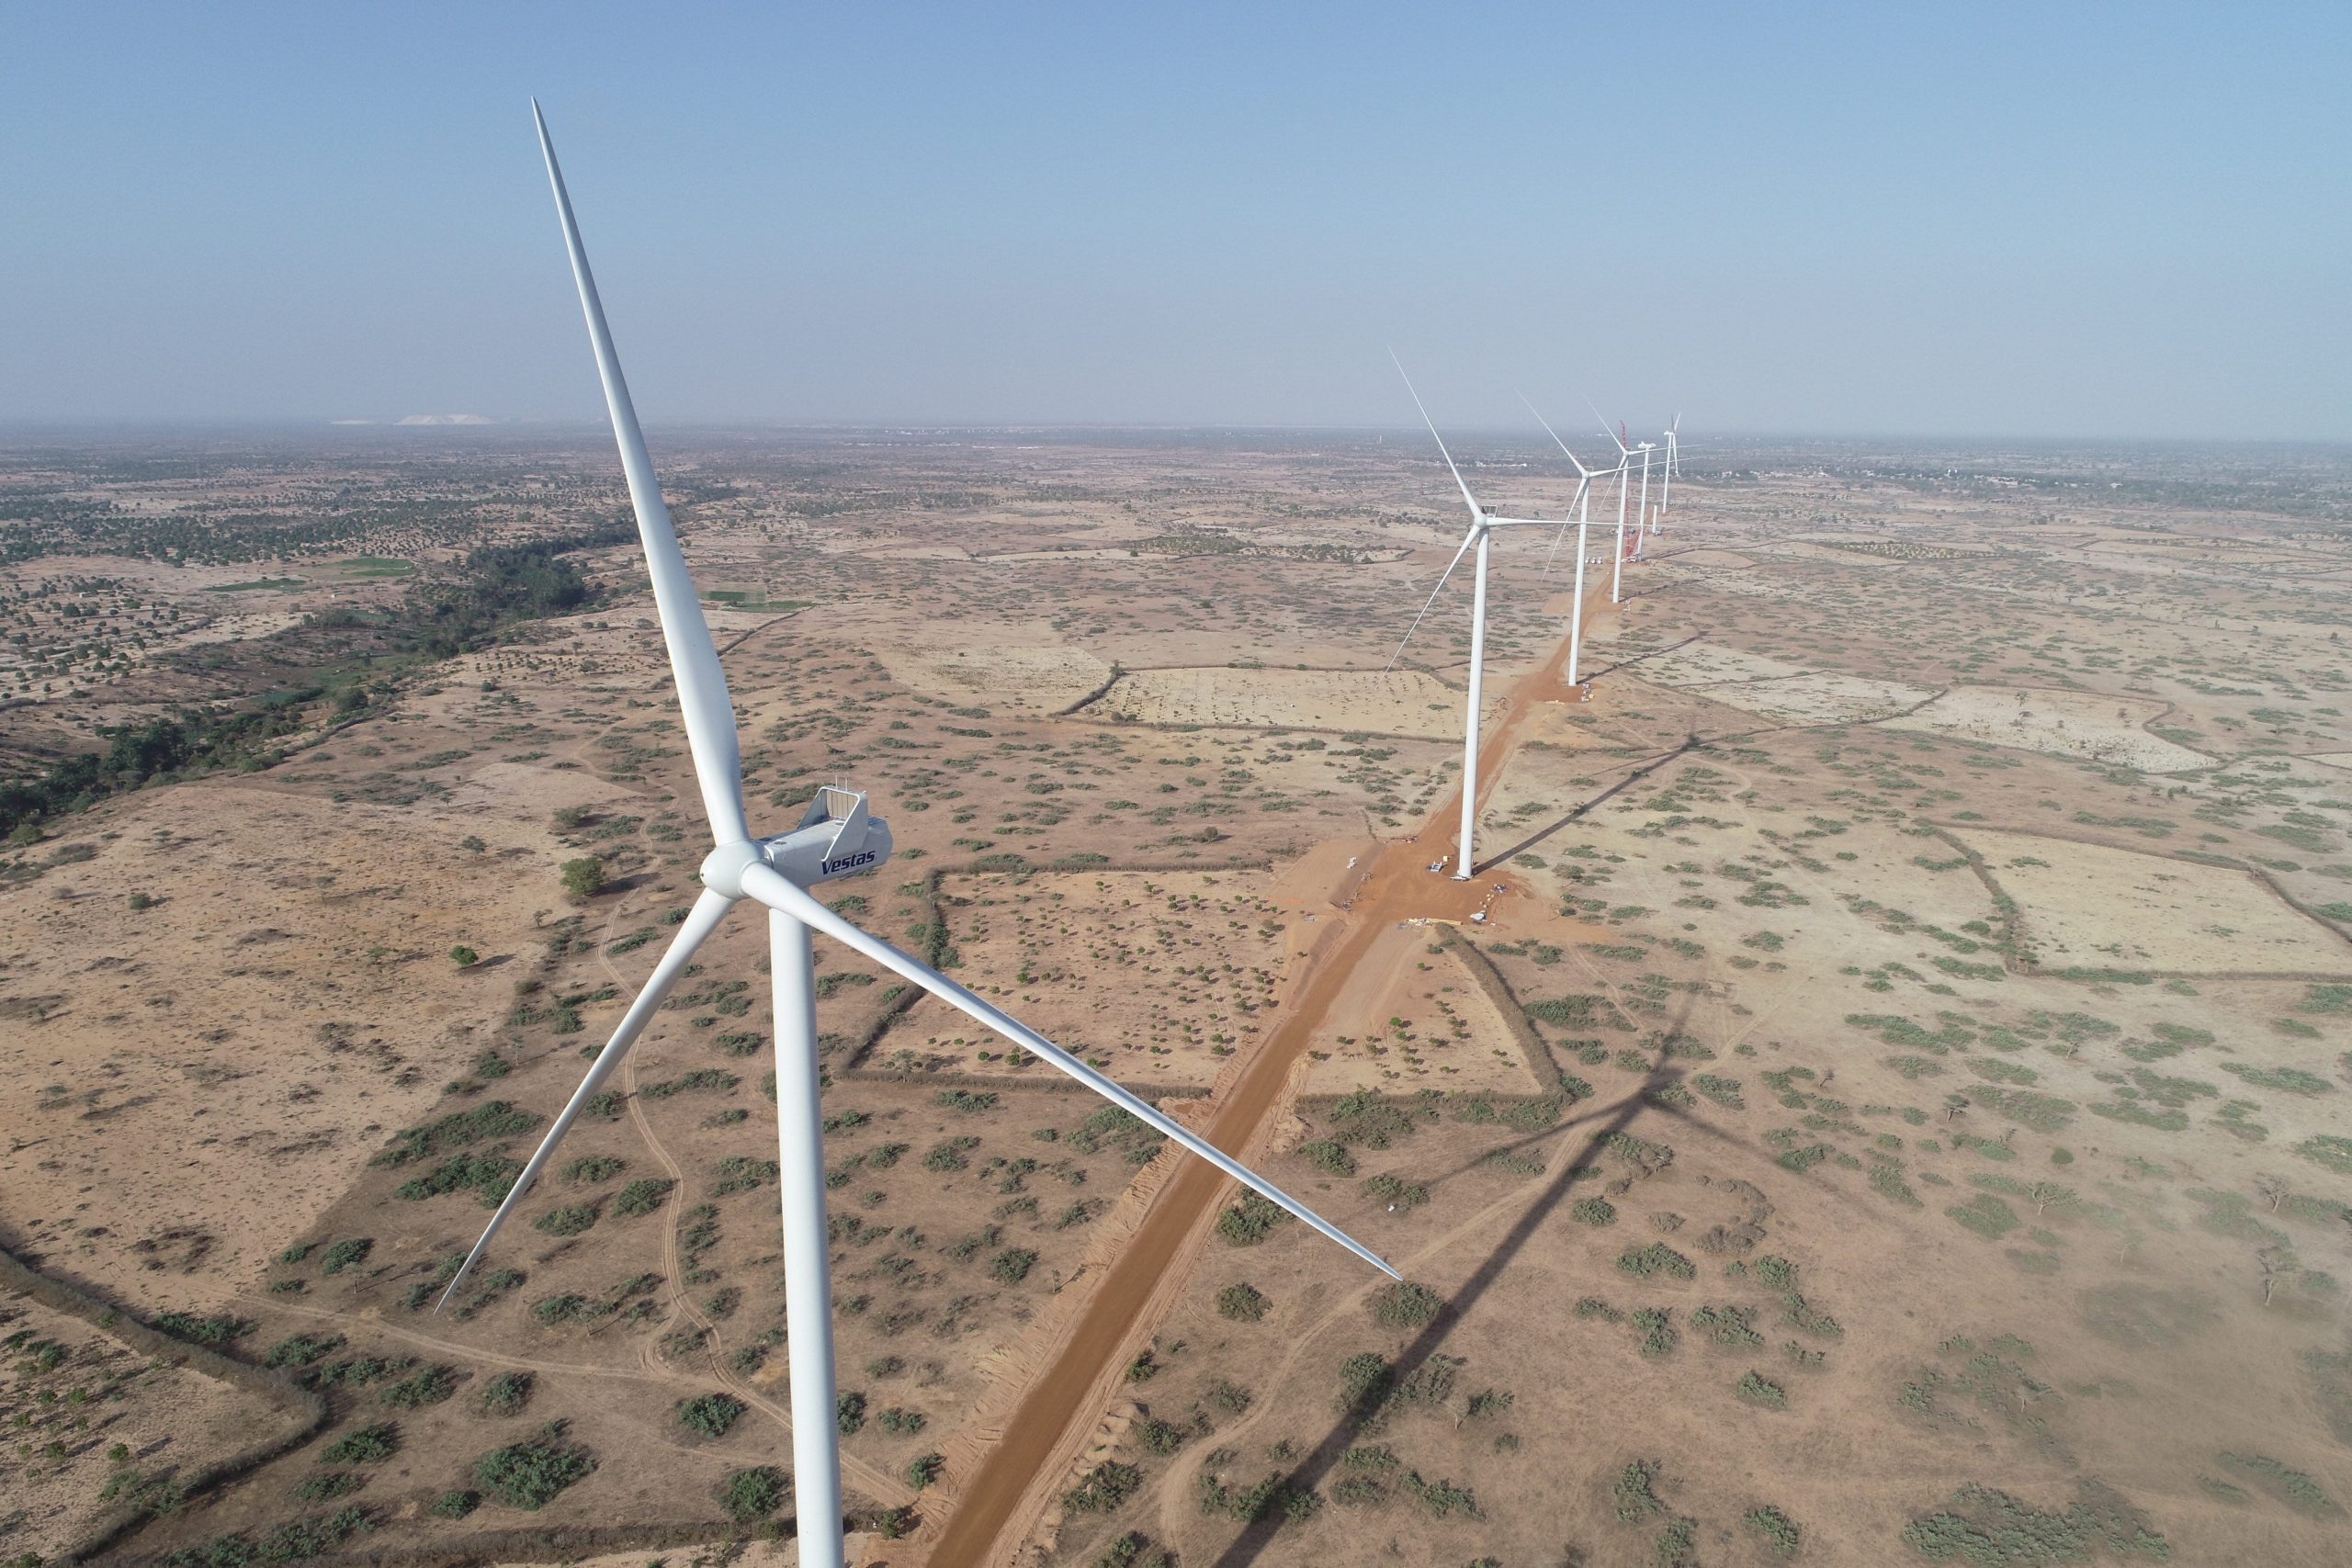 West Africa’s first large-scale wind farm begins producing energy